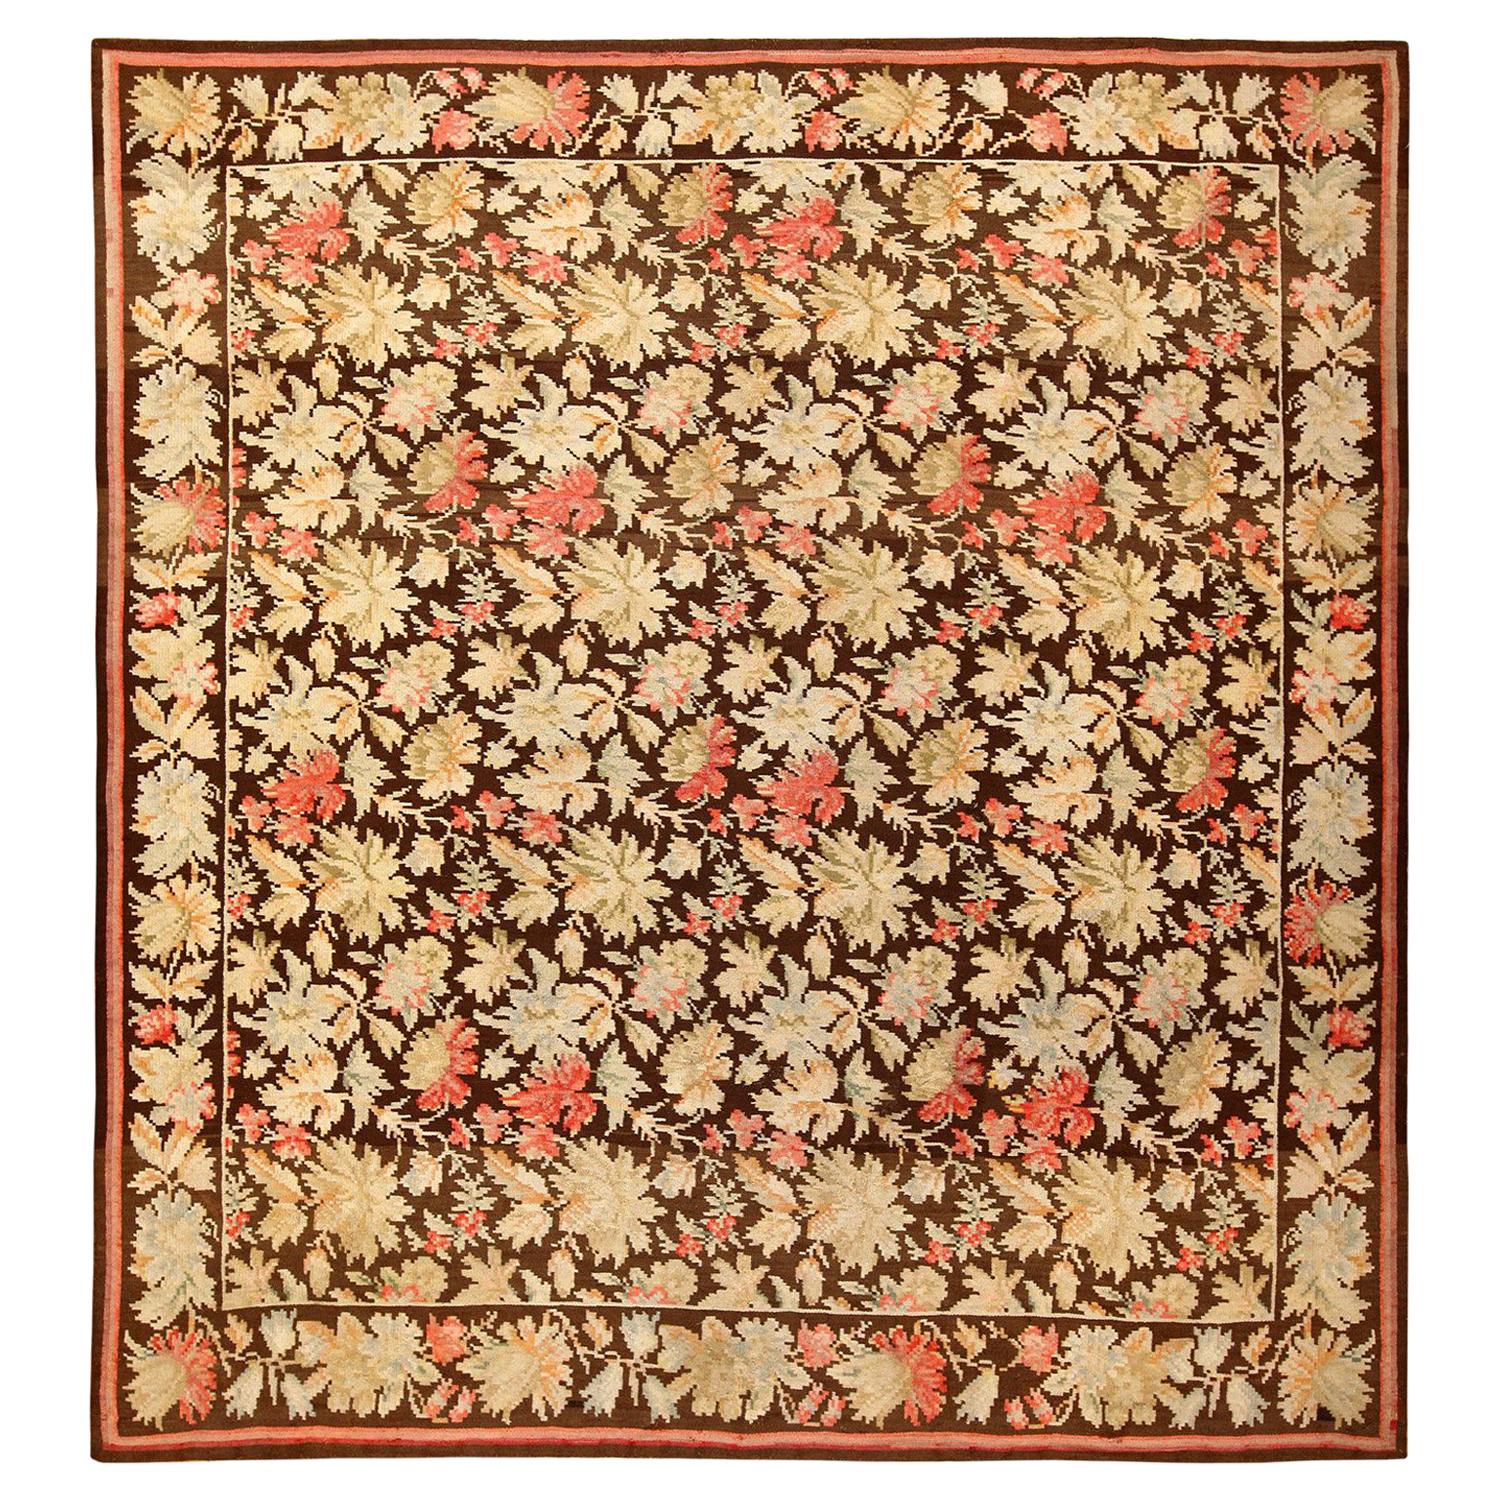 Nazmiyal Collection Antique Romanian Bessarabian Rug. 9 ft 8 in x 10 ft 8 in